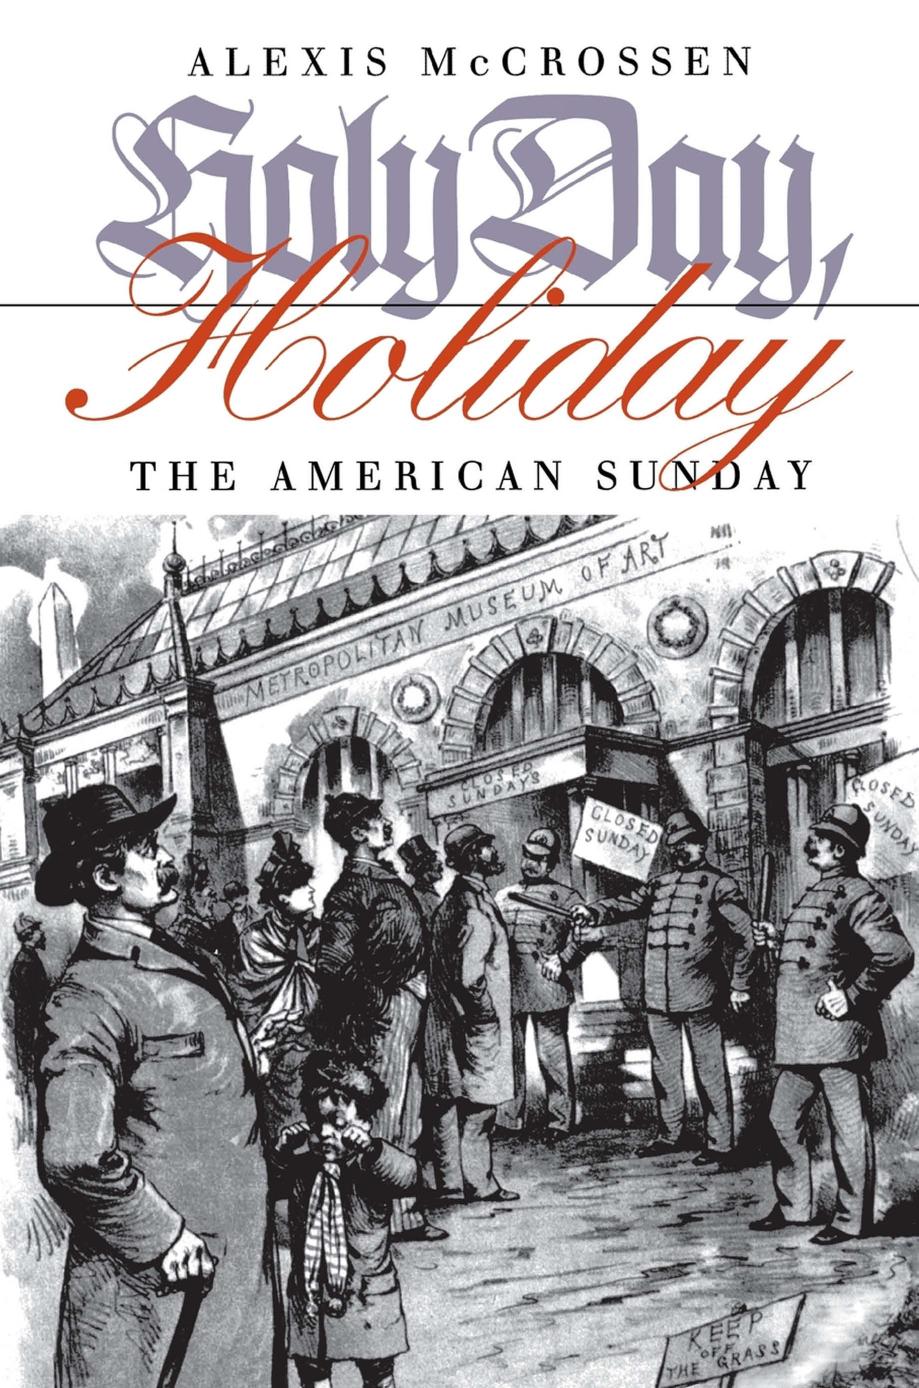 Holy Day, Holiday: The American Sunday by Alexis McCrossen